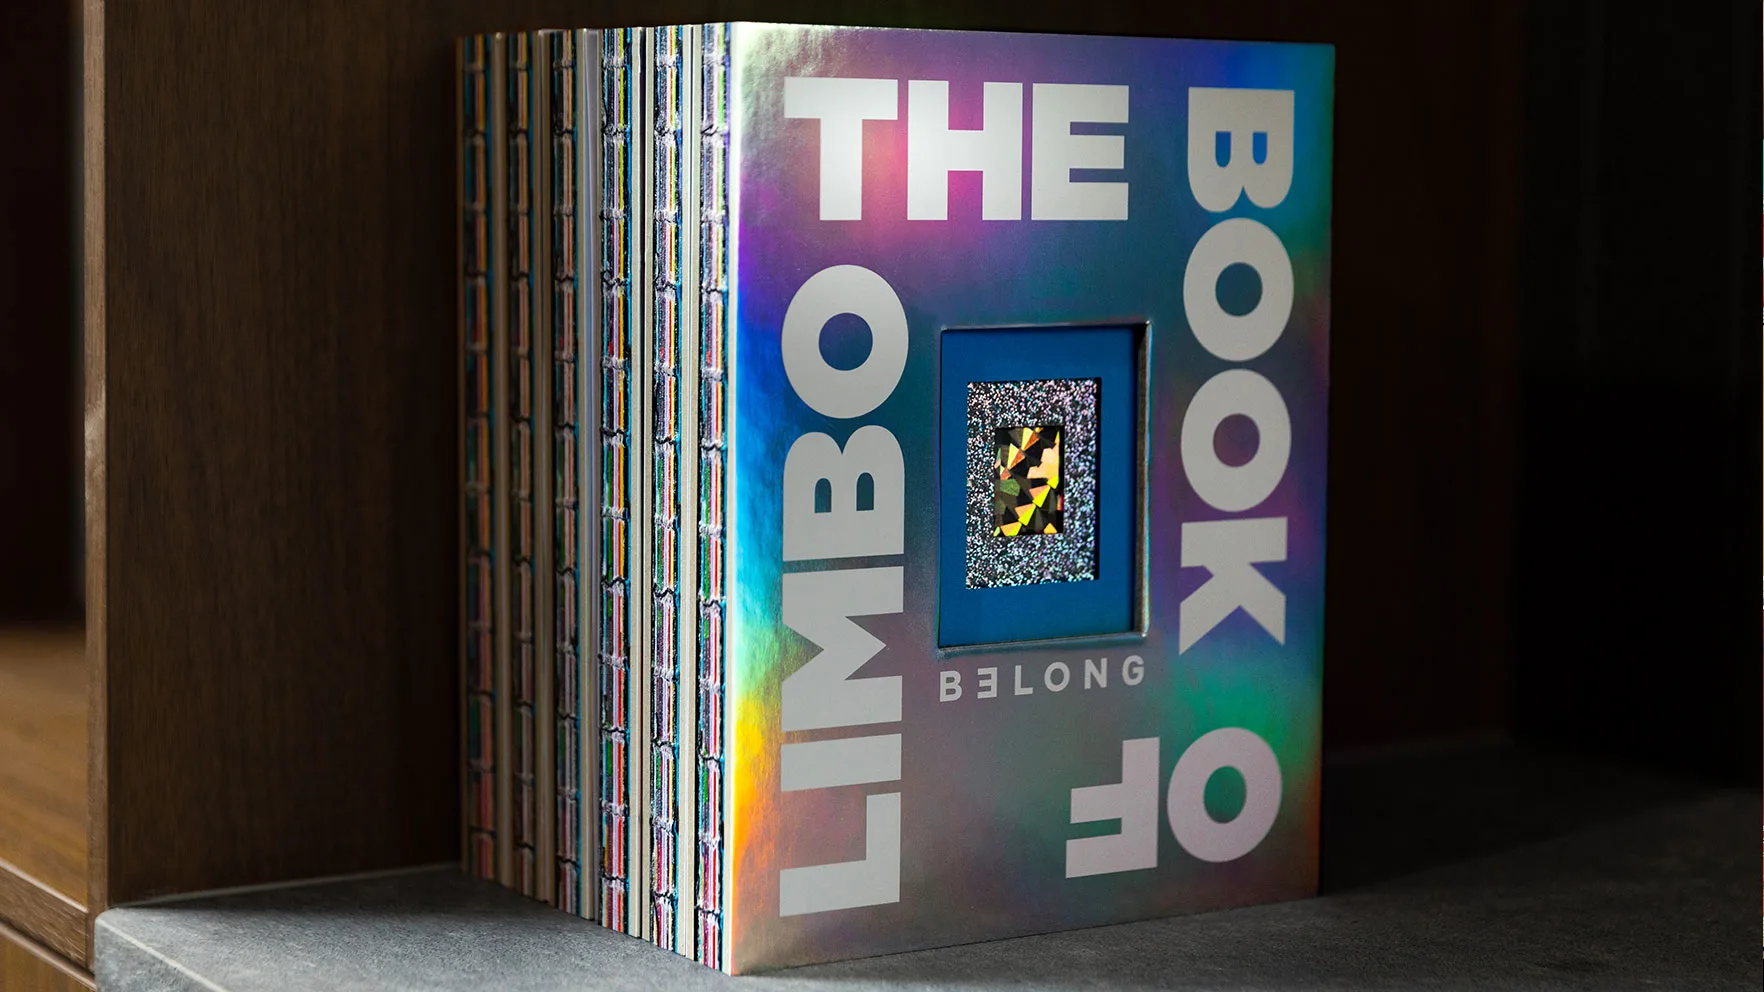 A stack on six copies of the Book Of Limbo on a wooden shelf